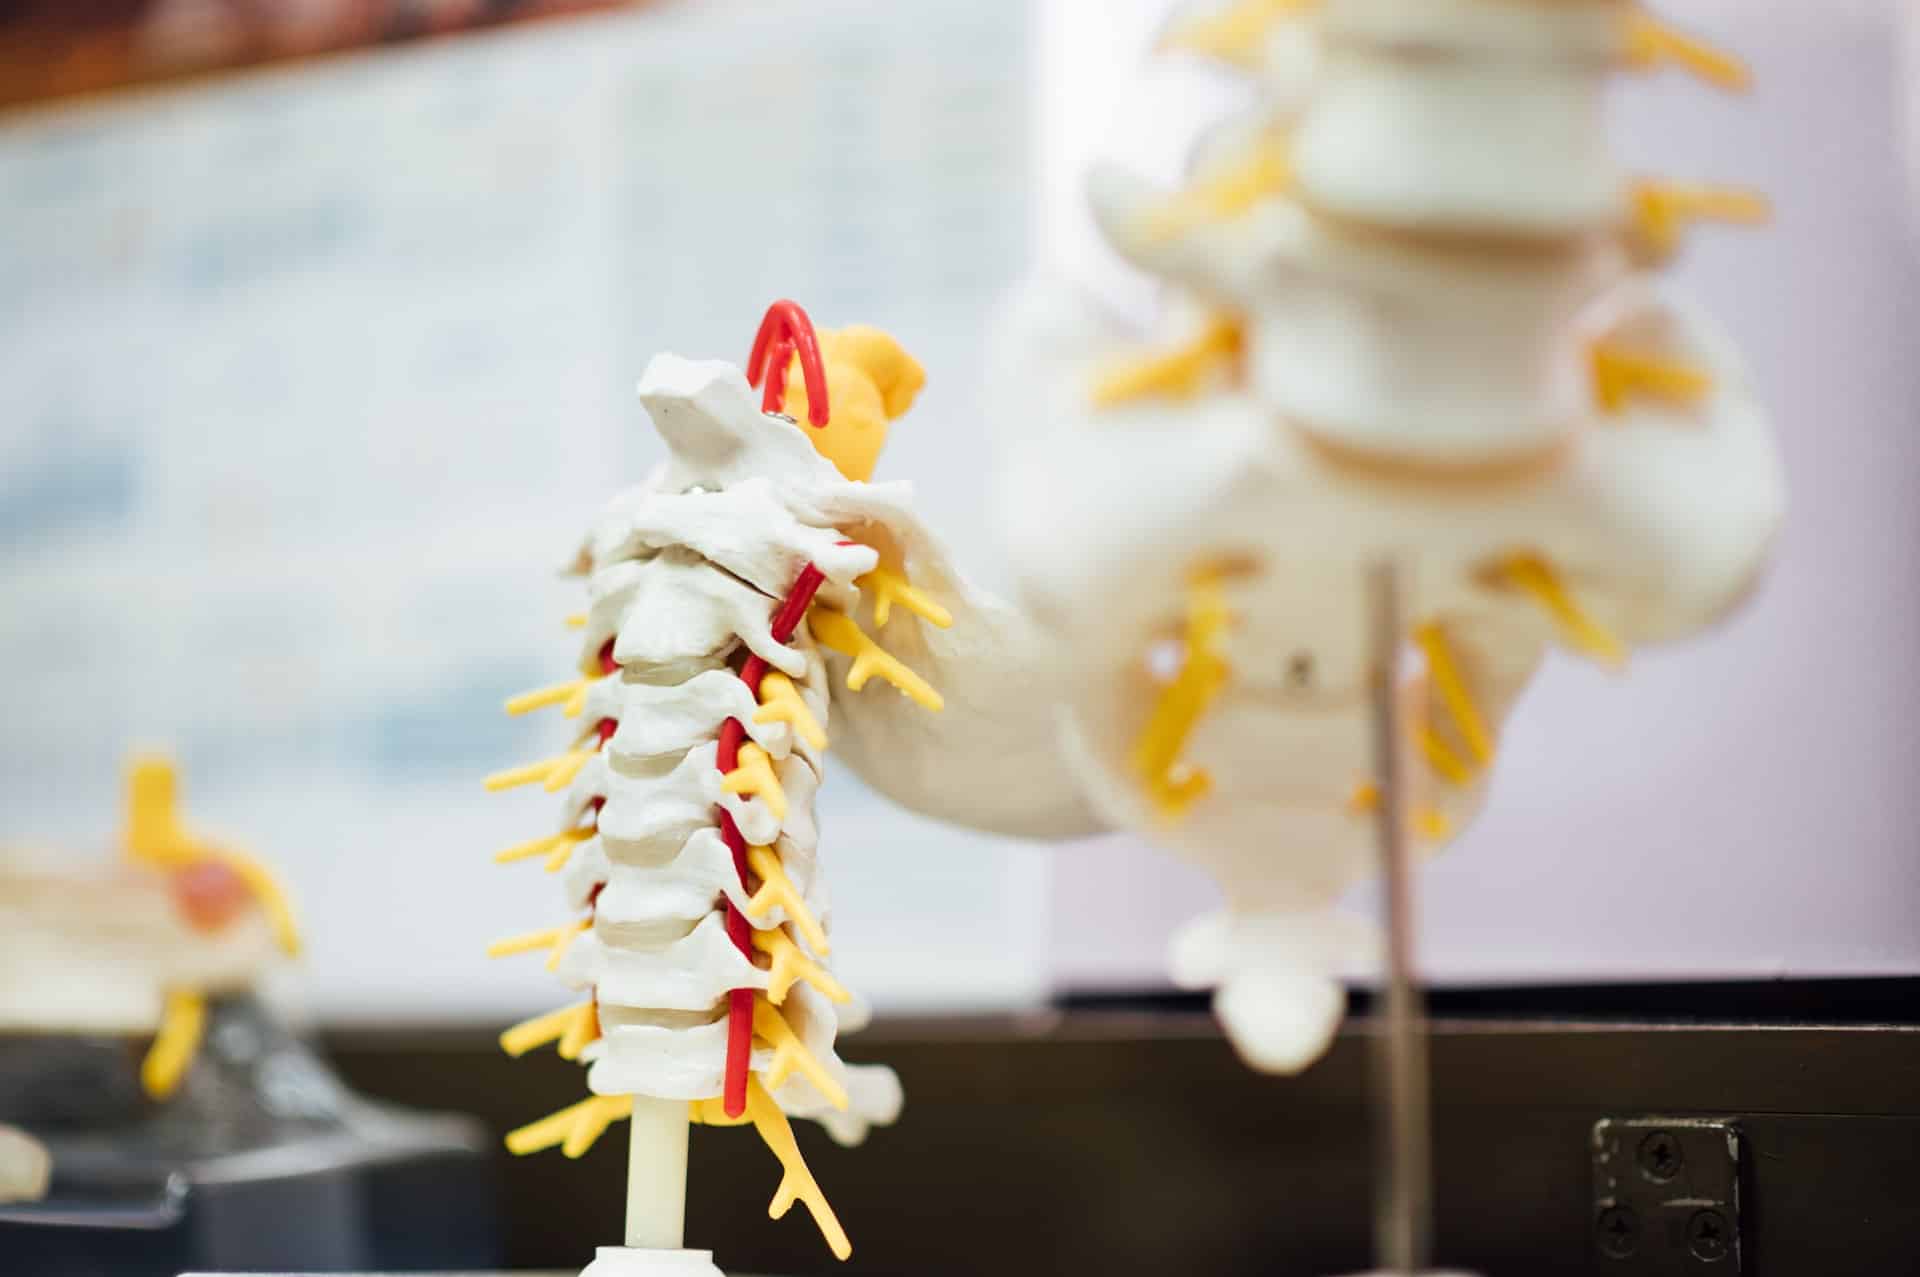 spine and lumbar model